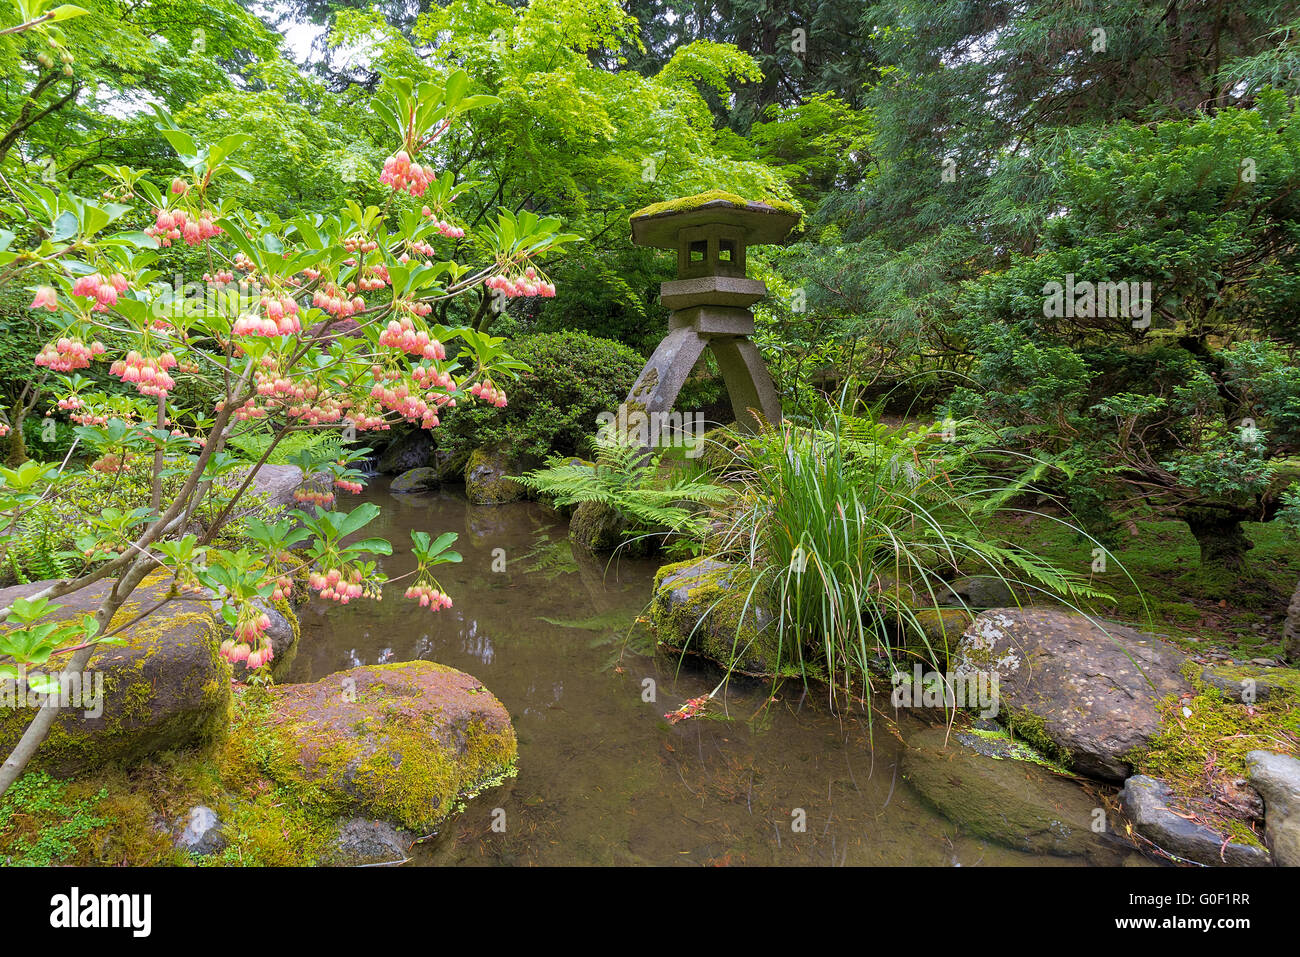 Japanese Snowbell Flowers in Bloom by Creek and Stone Lantern at Japanese Garden in Spring Stock Photo